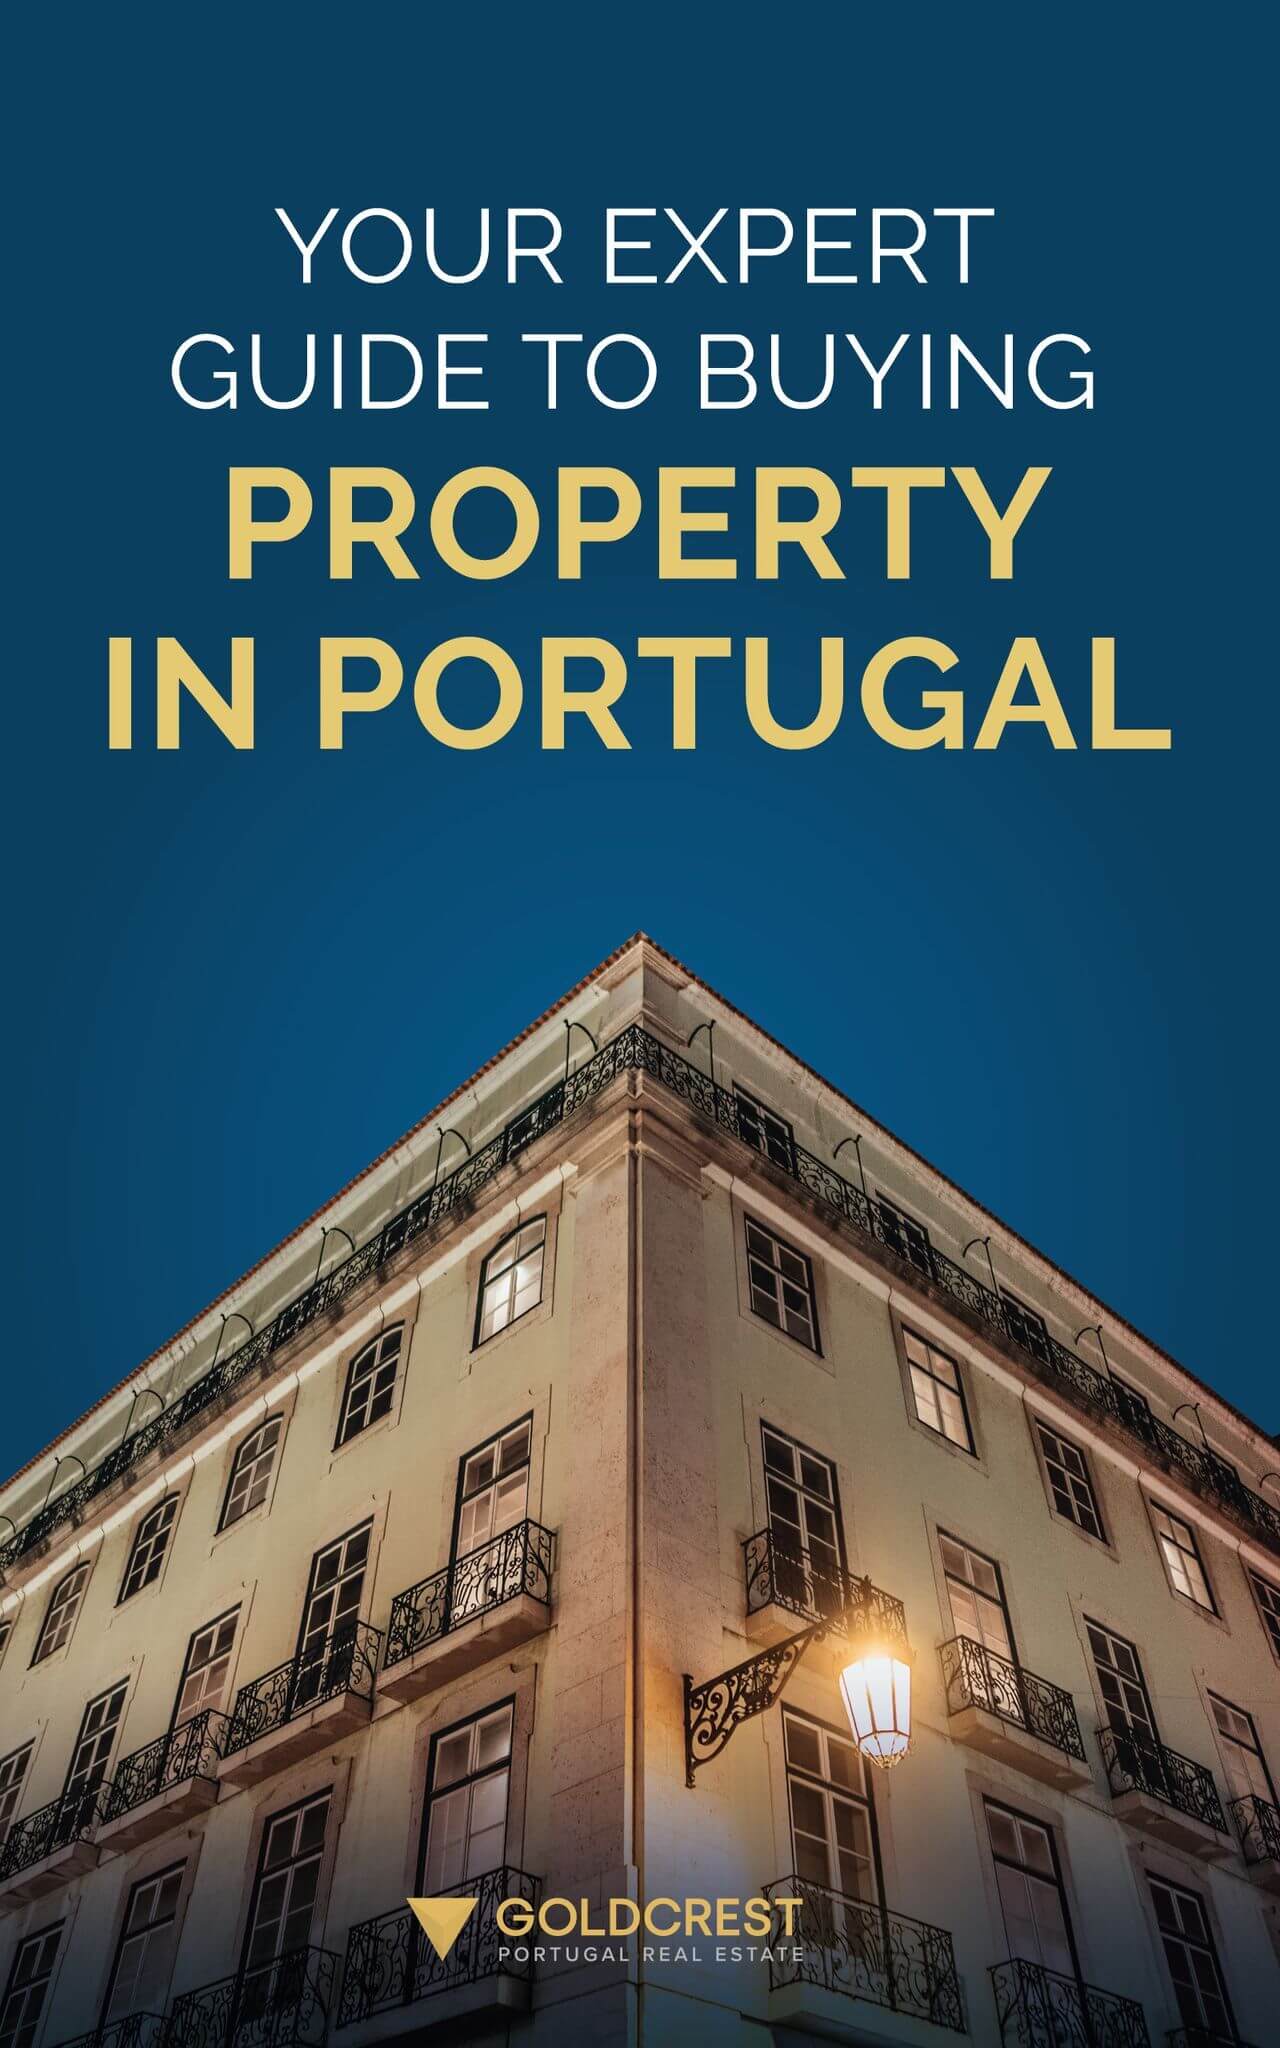 About Your Expert Guide to Buying Property in Portugal